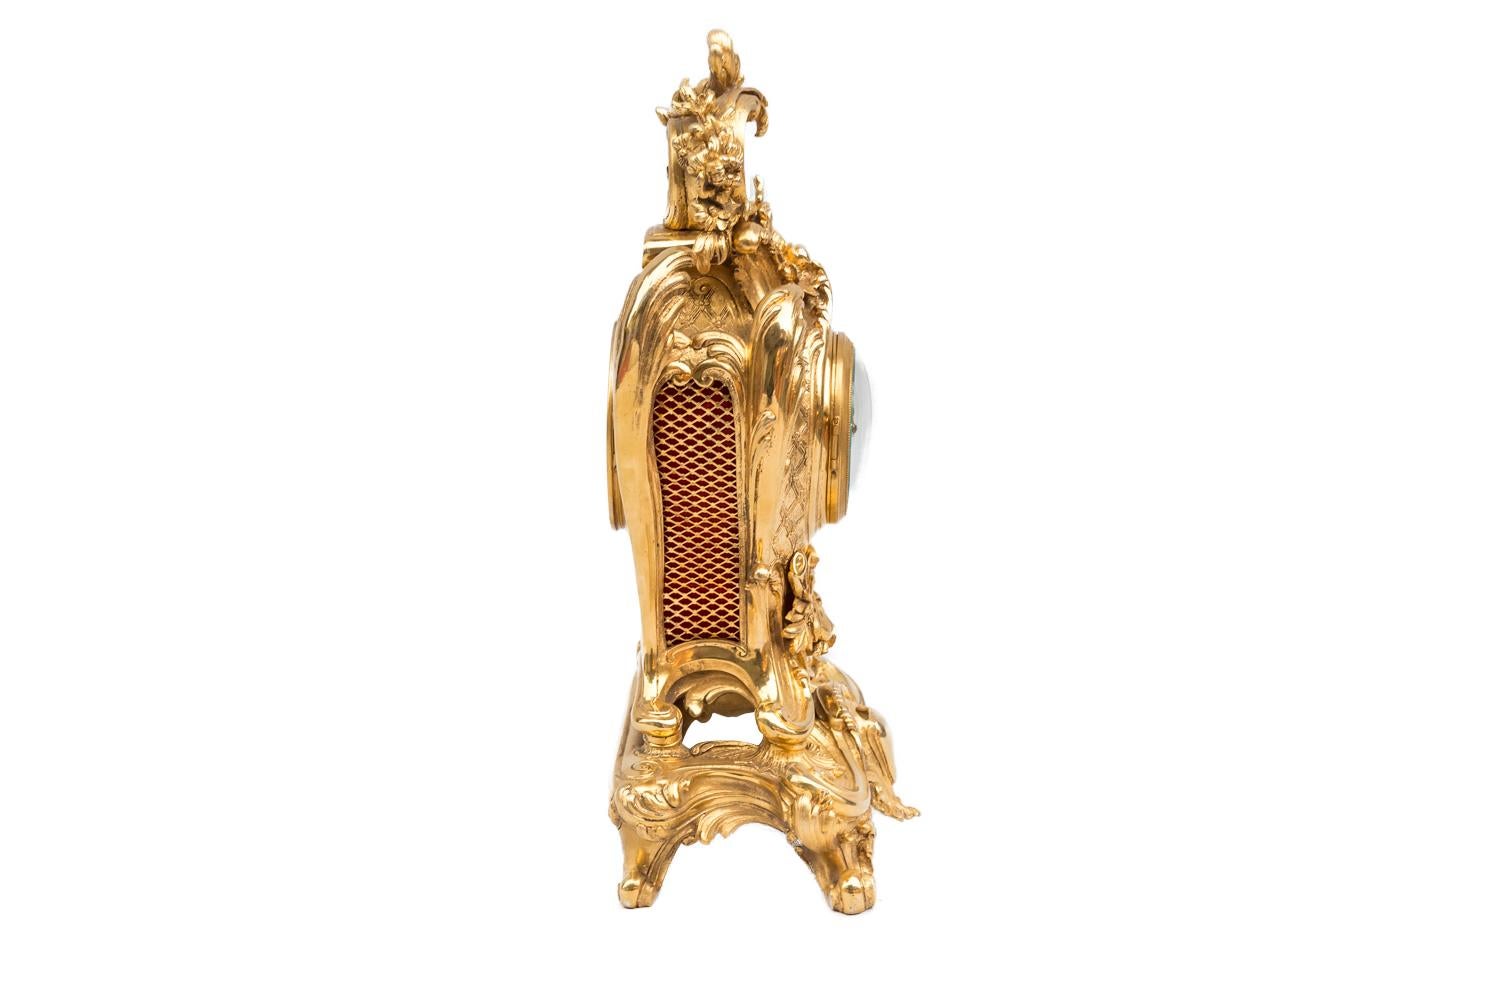 Benoît Félix Richond, signed.

Rocaille style gilt bronze clock.
Tumultuous case in a stylized cartouche shape standing on a scalloped base with four scrolls legs and a central cartouche decor.
Top of the case adorned with a shell crowned by a